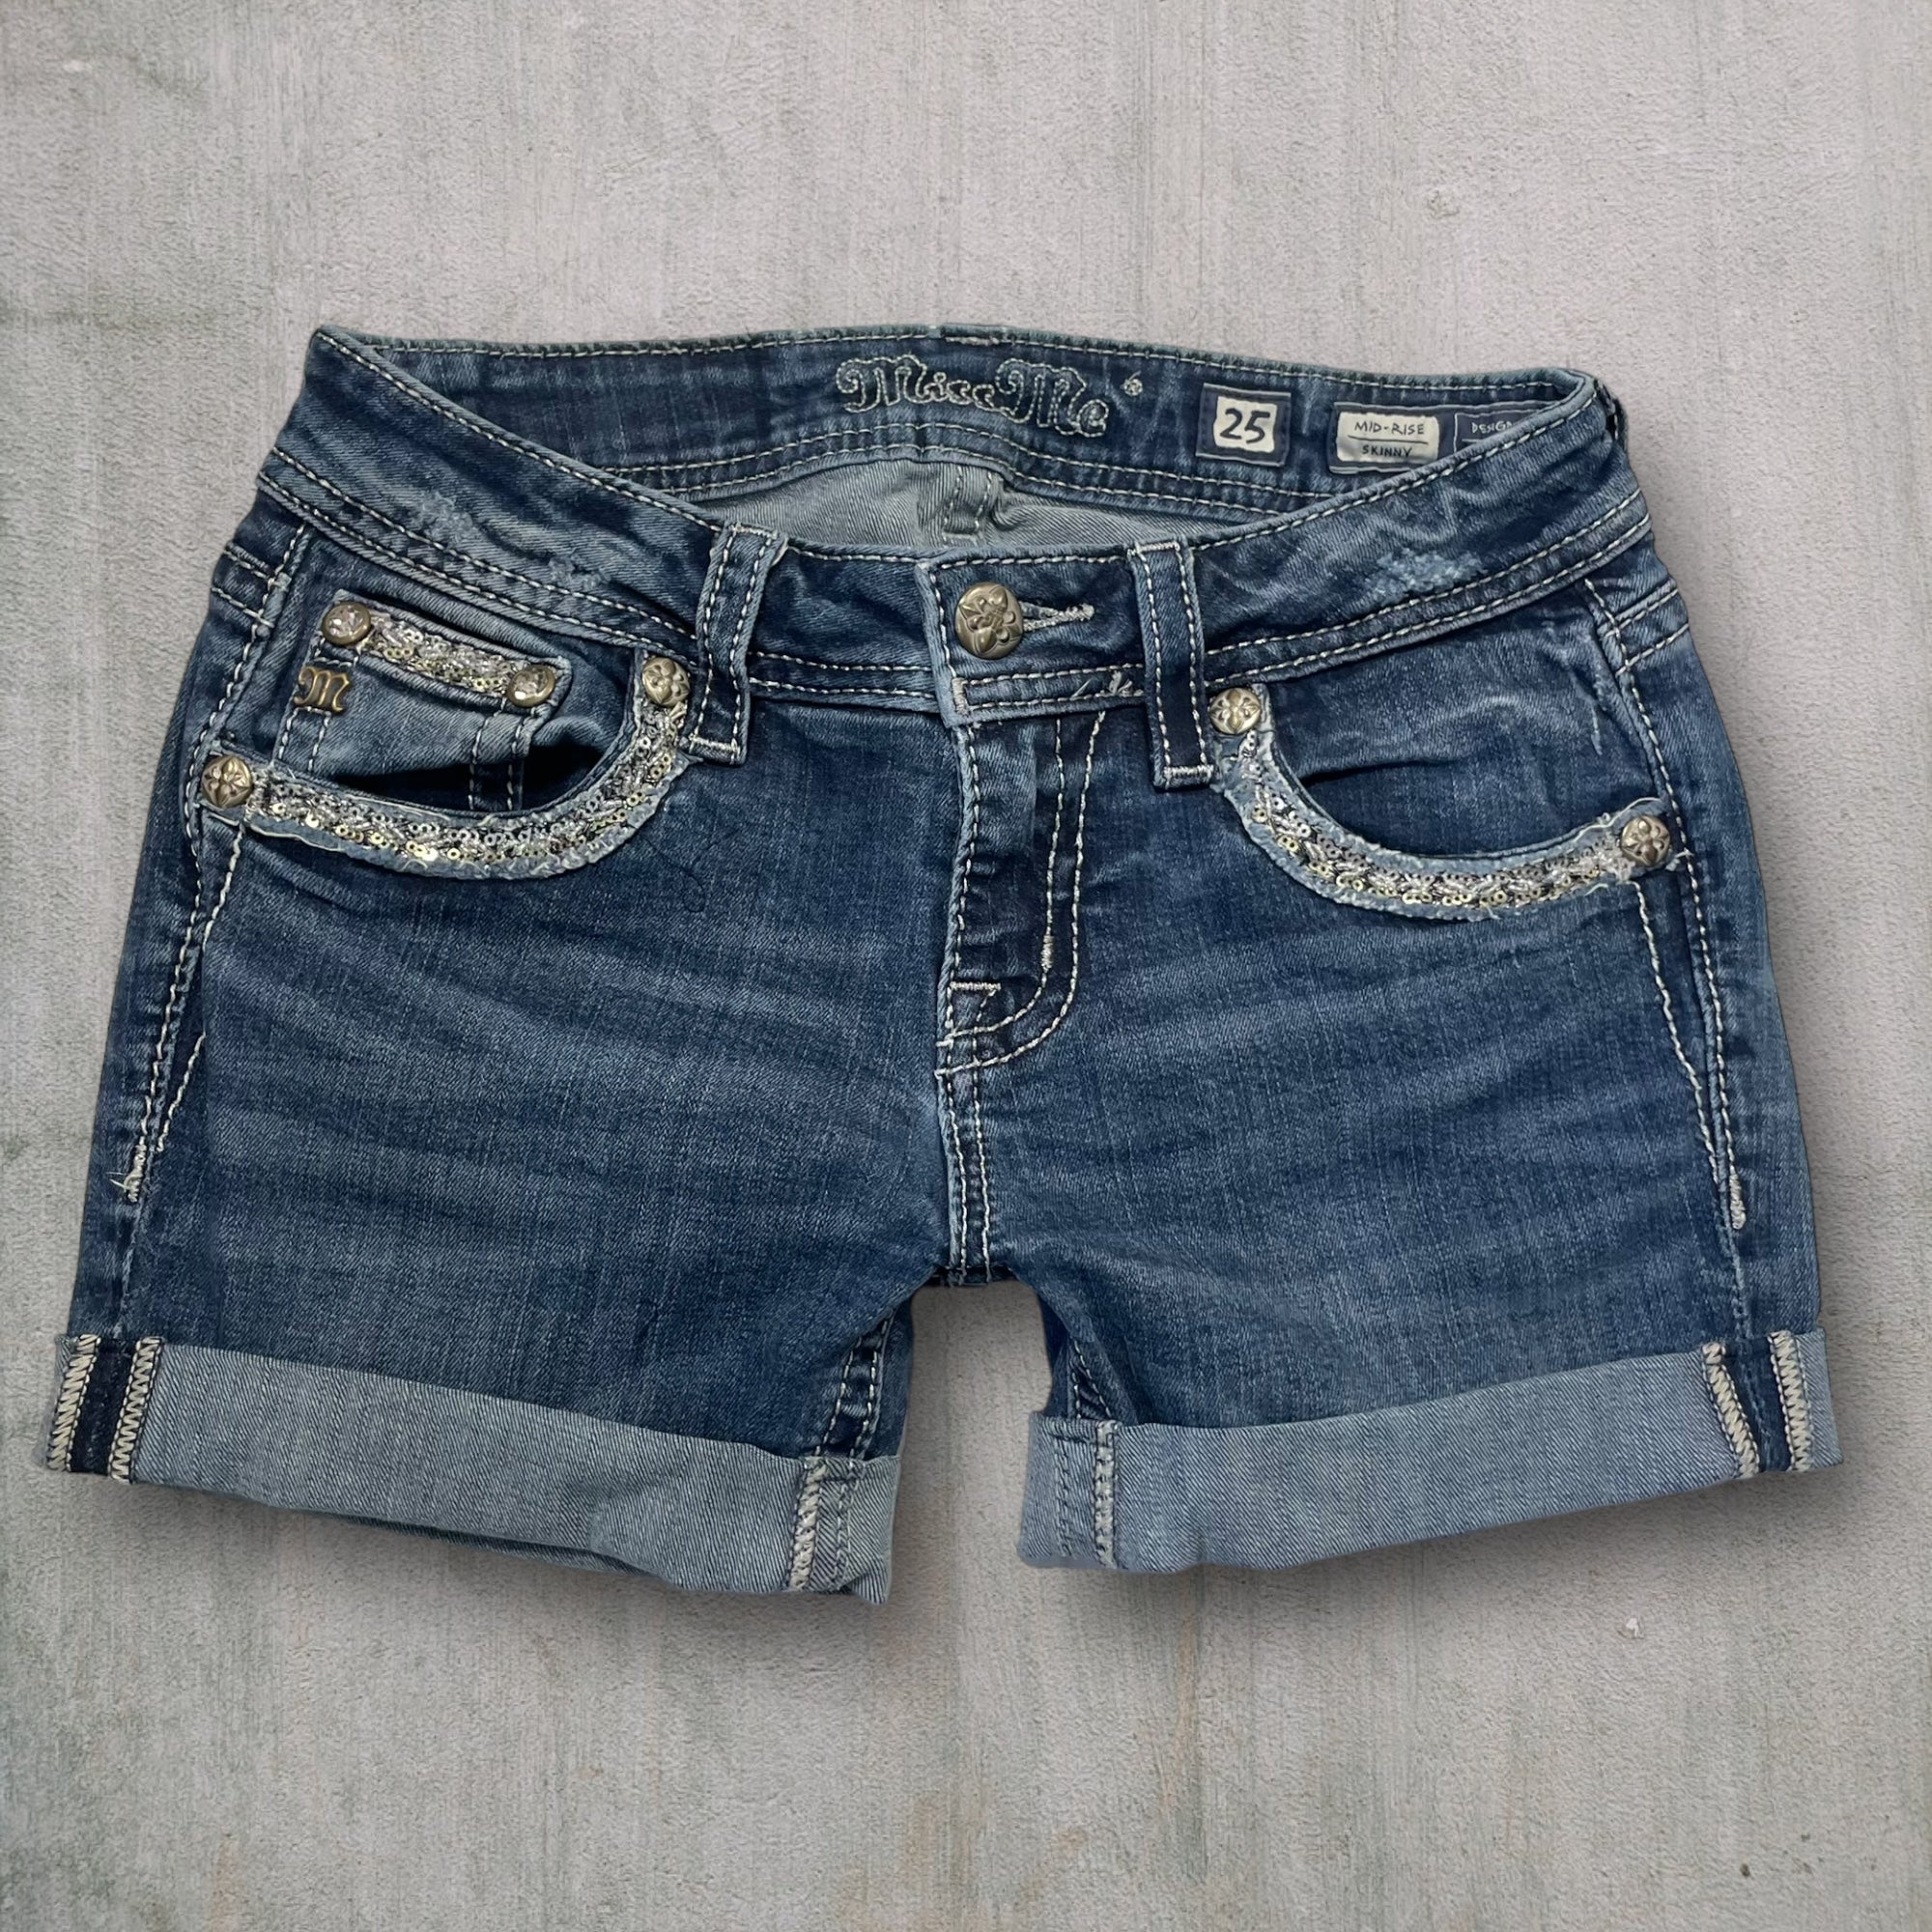 Miss Me Reworked Shorts (25W) M539